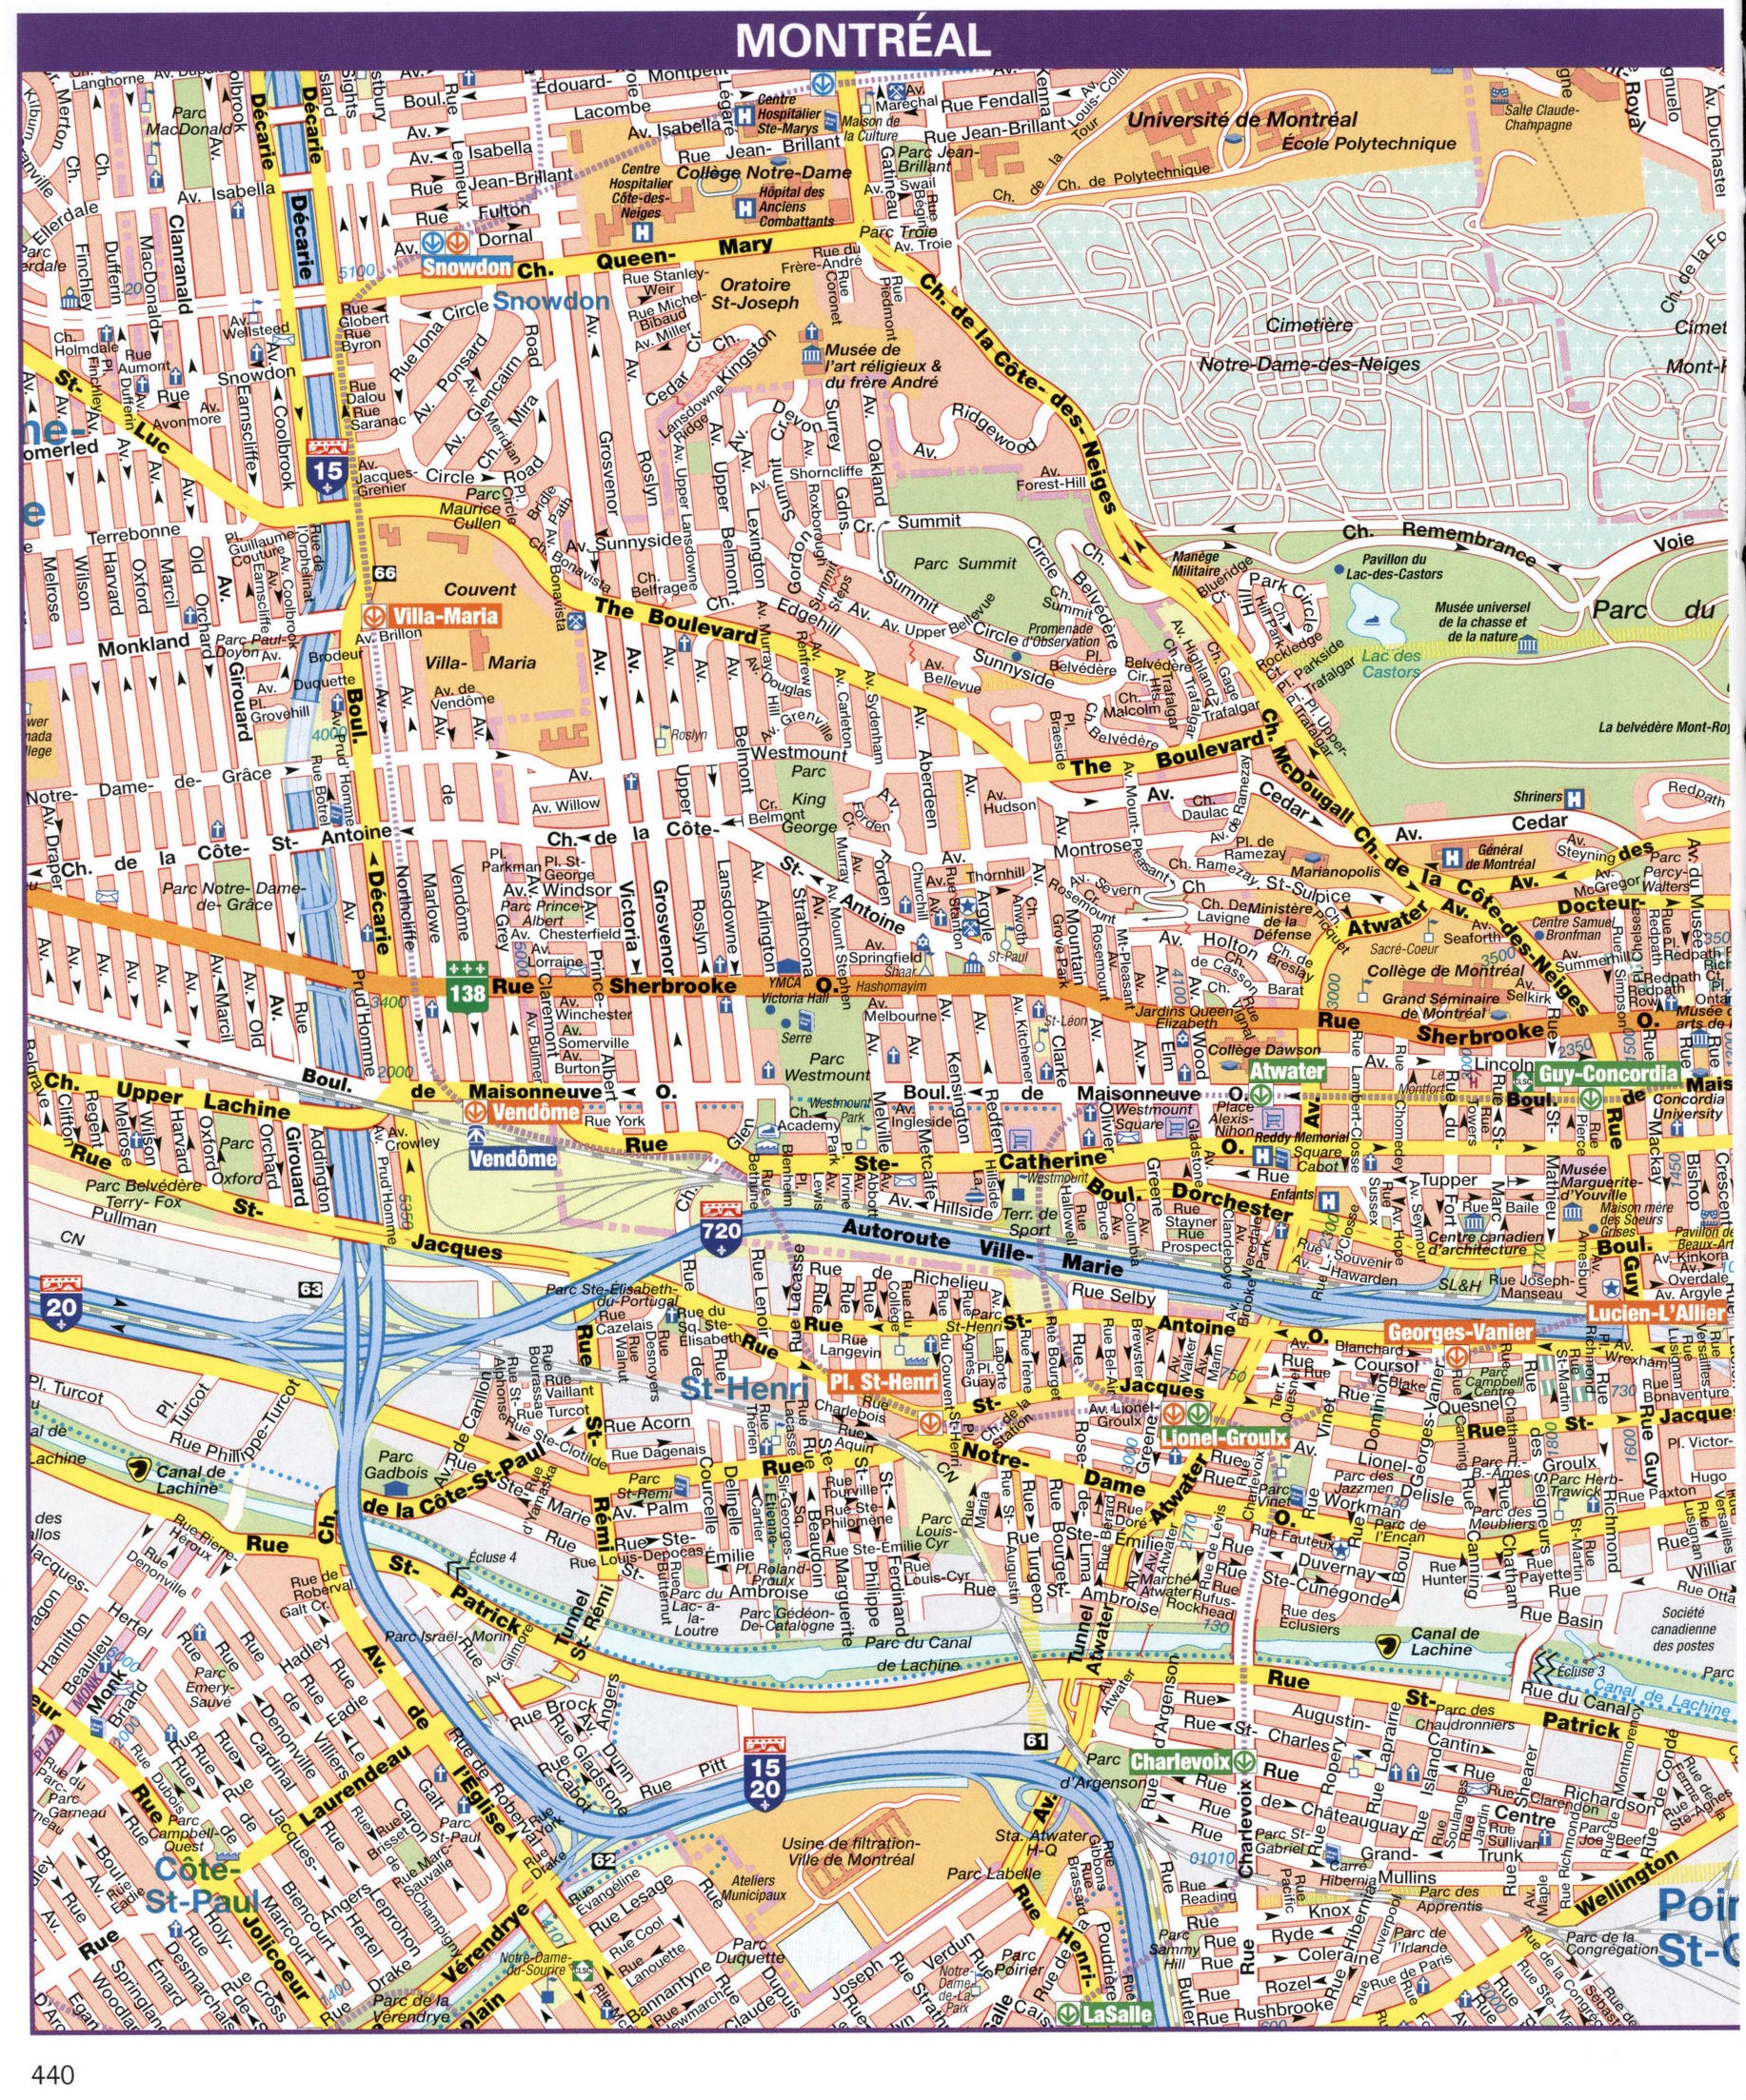 Montreal city map